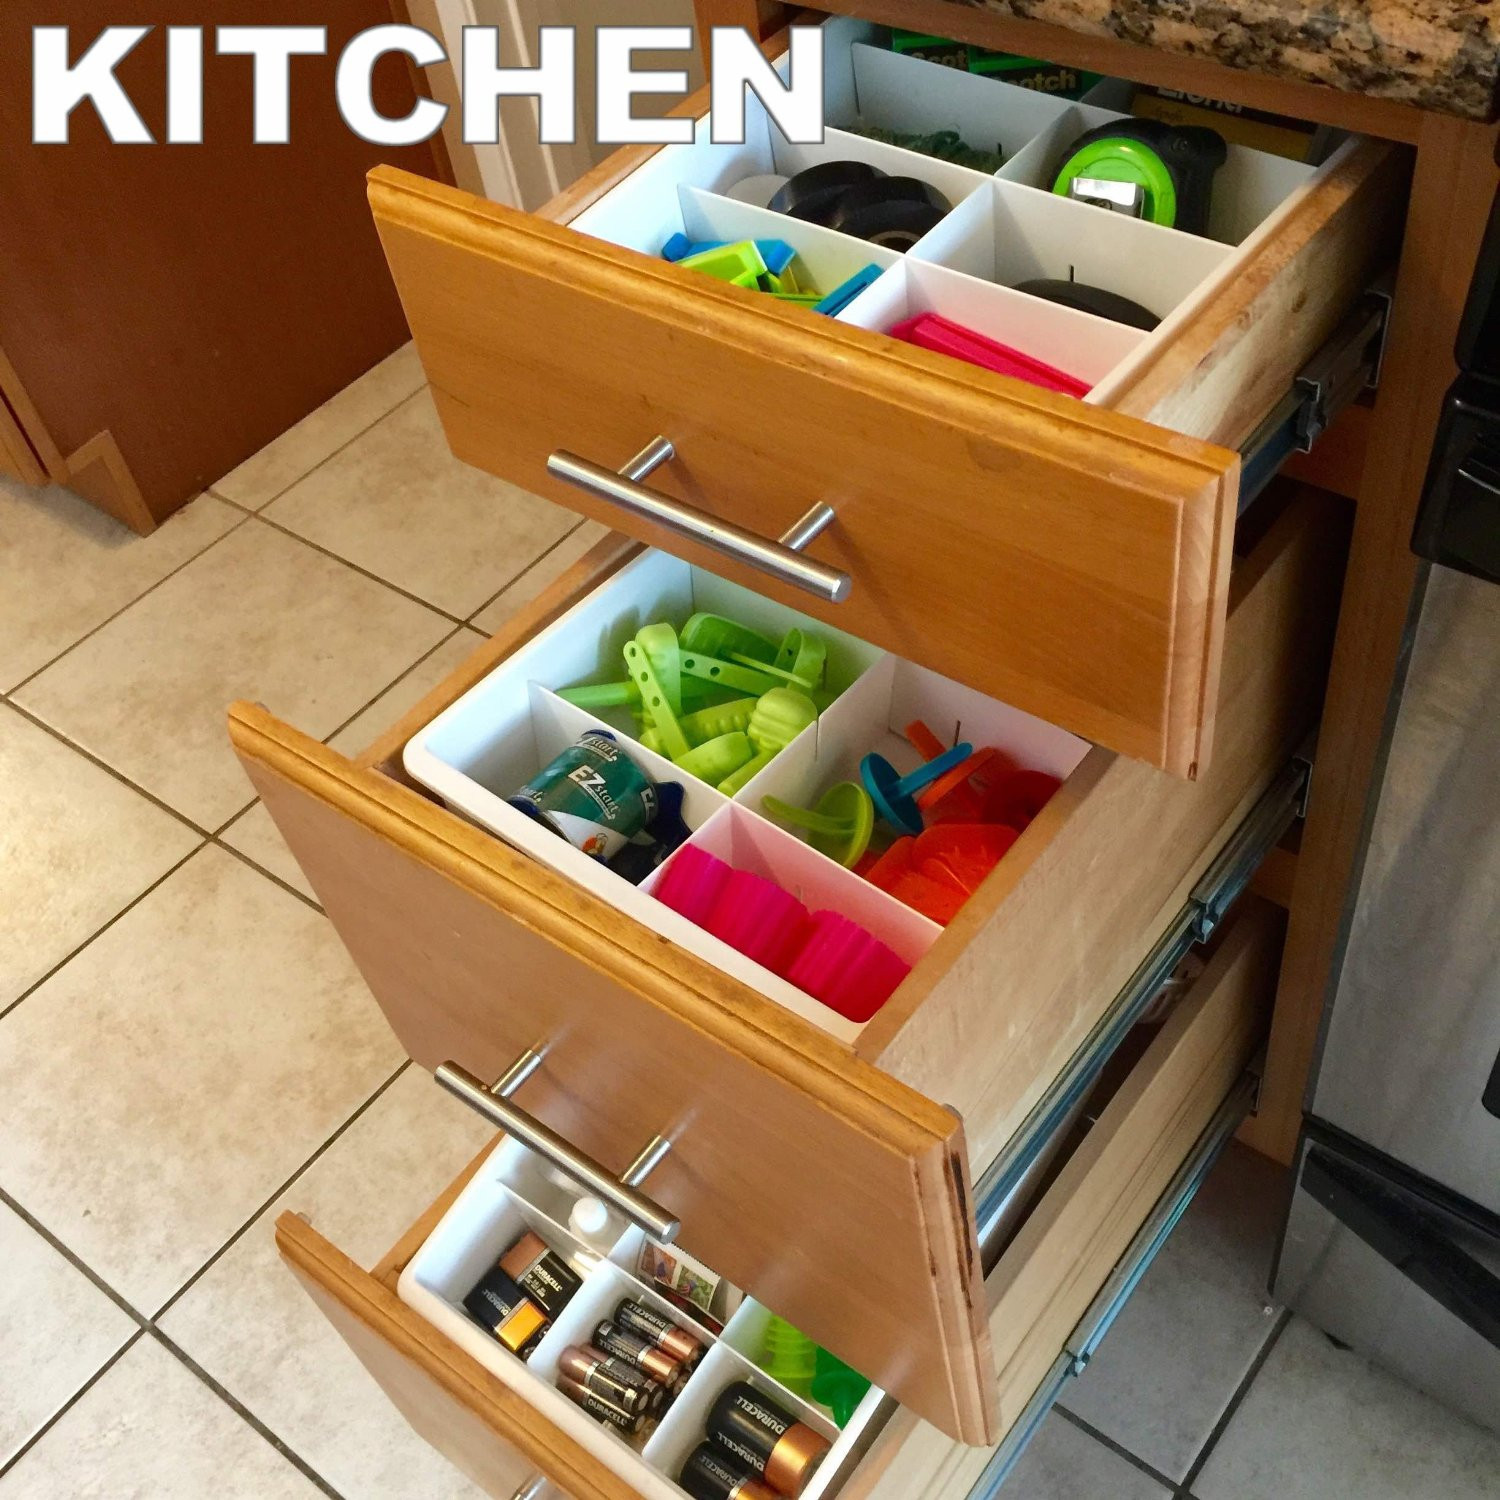 Kitchen Organizer Products
 Kitchen Organization the 10 supplies you need The